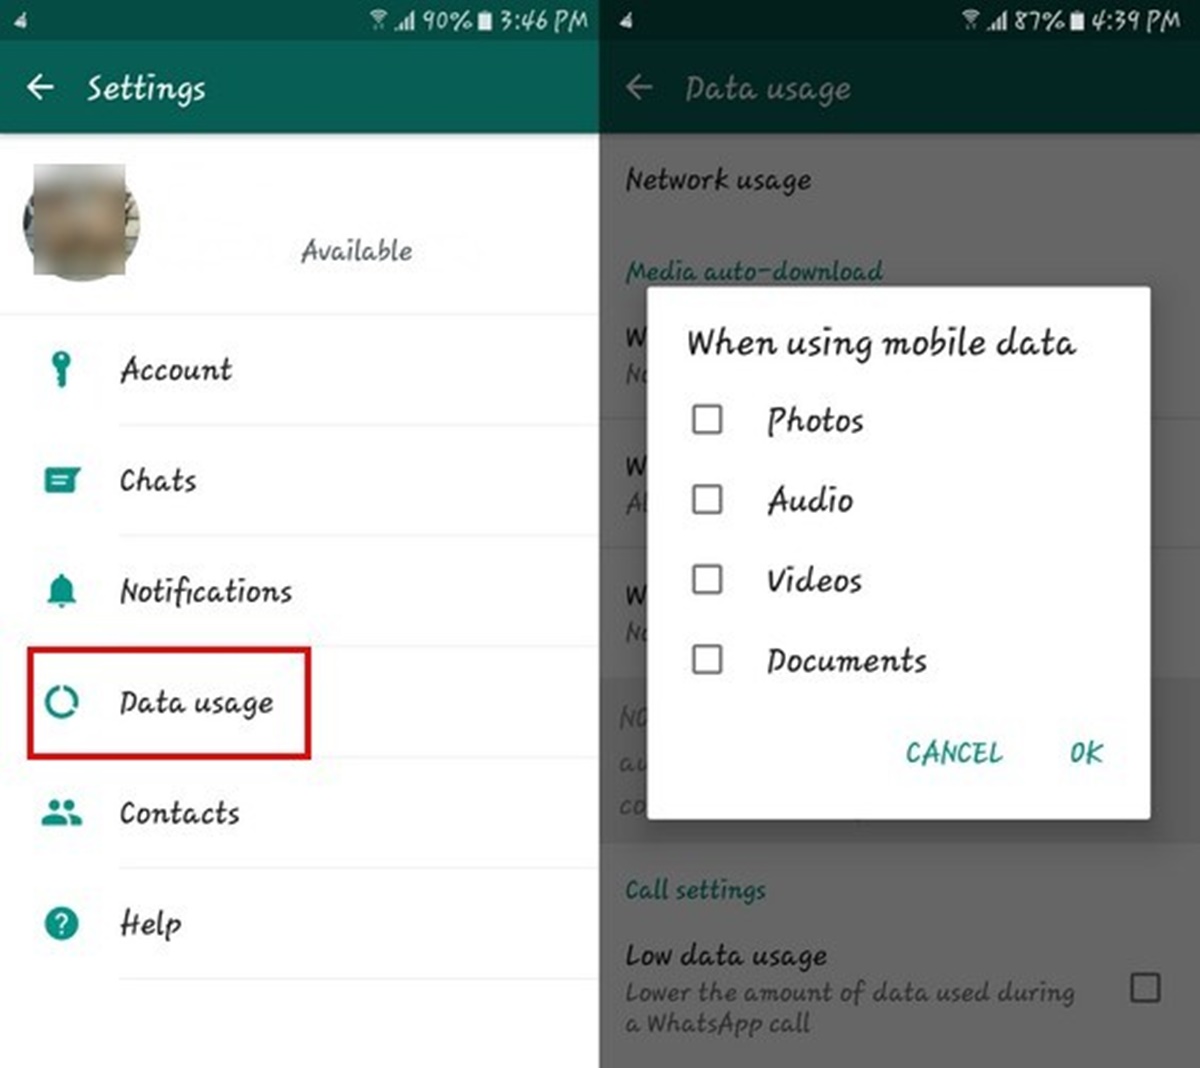 How To Save Mobile Data When Using WhatsApp